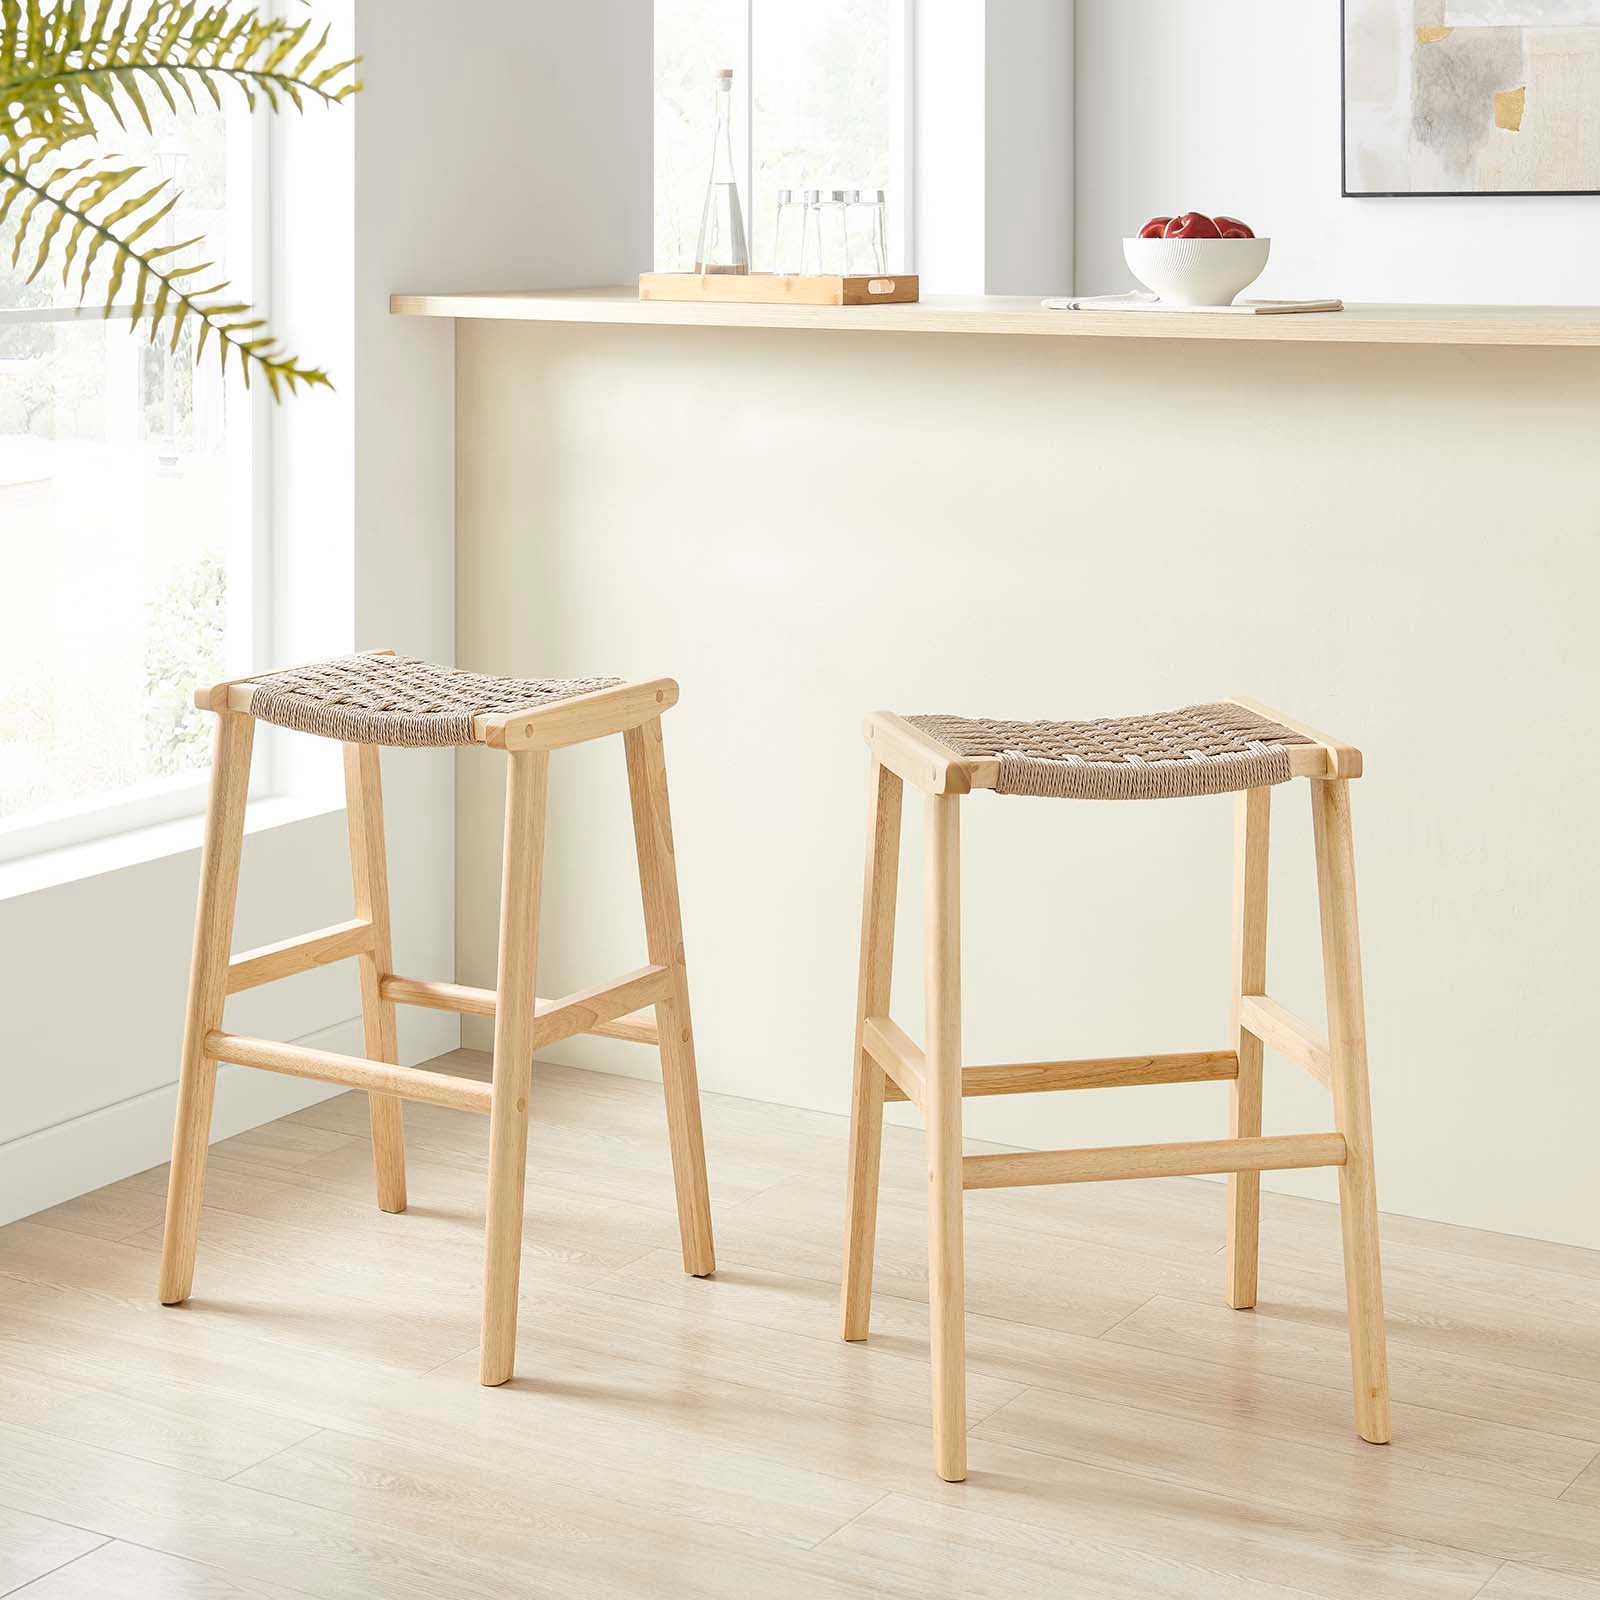 Saoirse Woven Rope Wood Bar Stool - Set of 2 By Modway - EEI-6550 | Bar Stools | Modway - 16